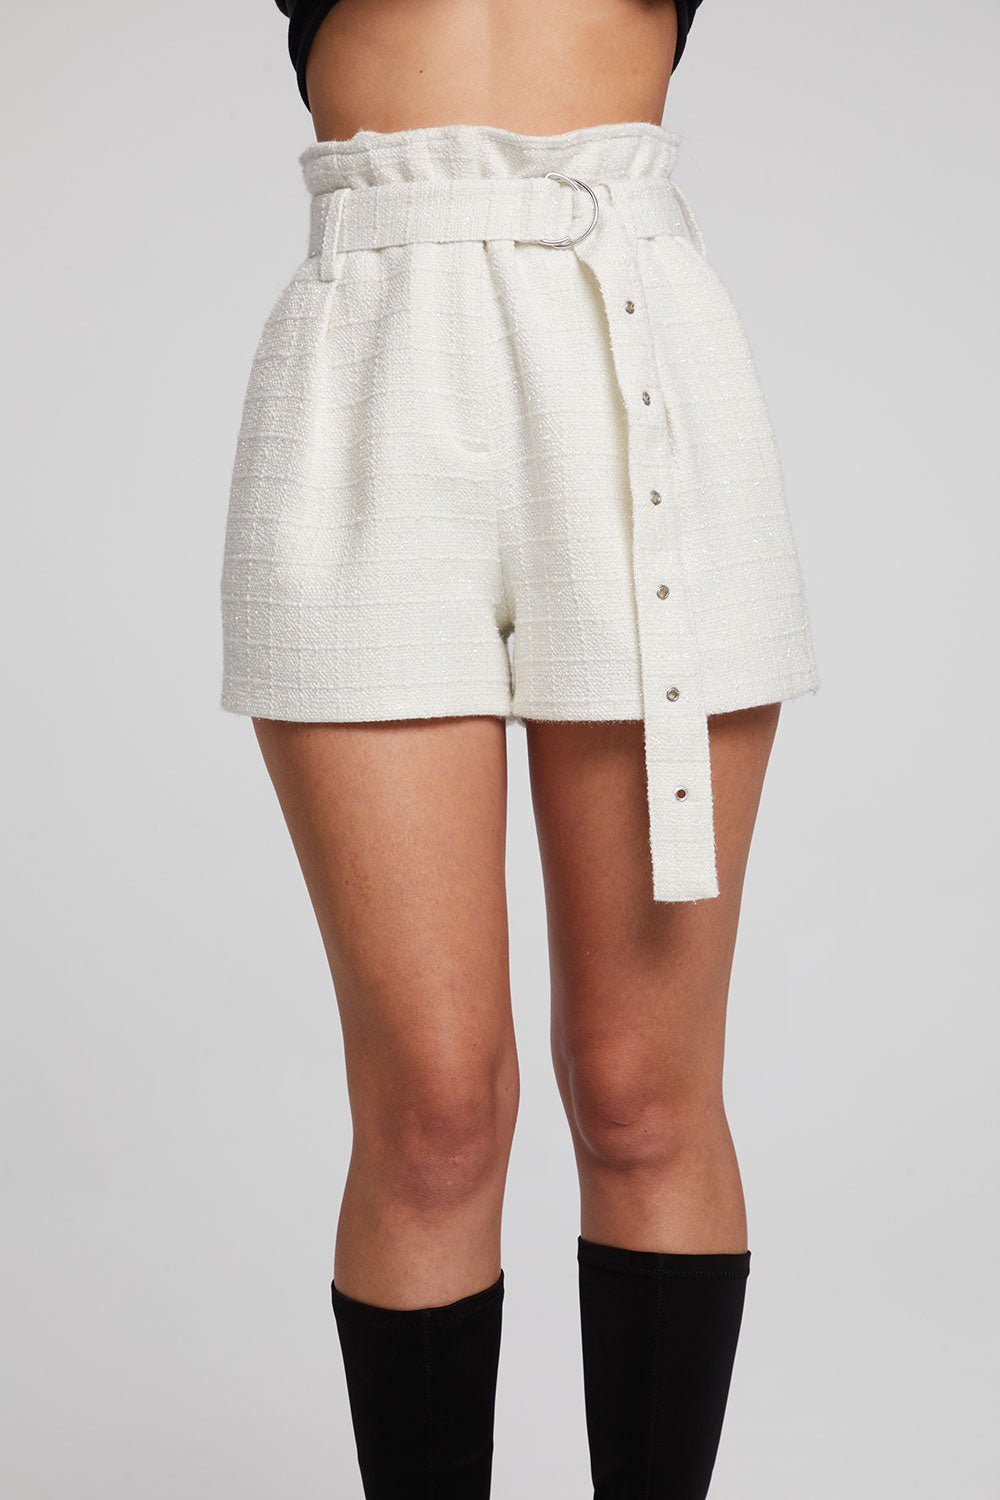 Chaser Lombard Shorts in Starry White - Estilo Boutique